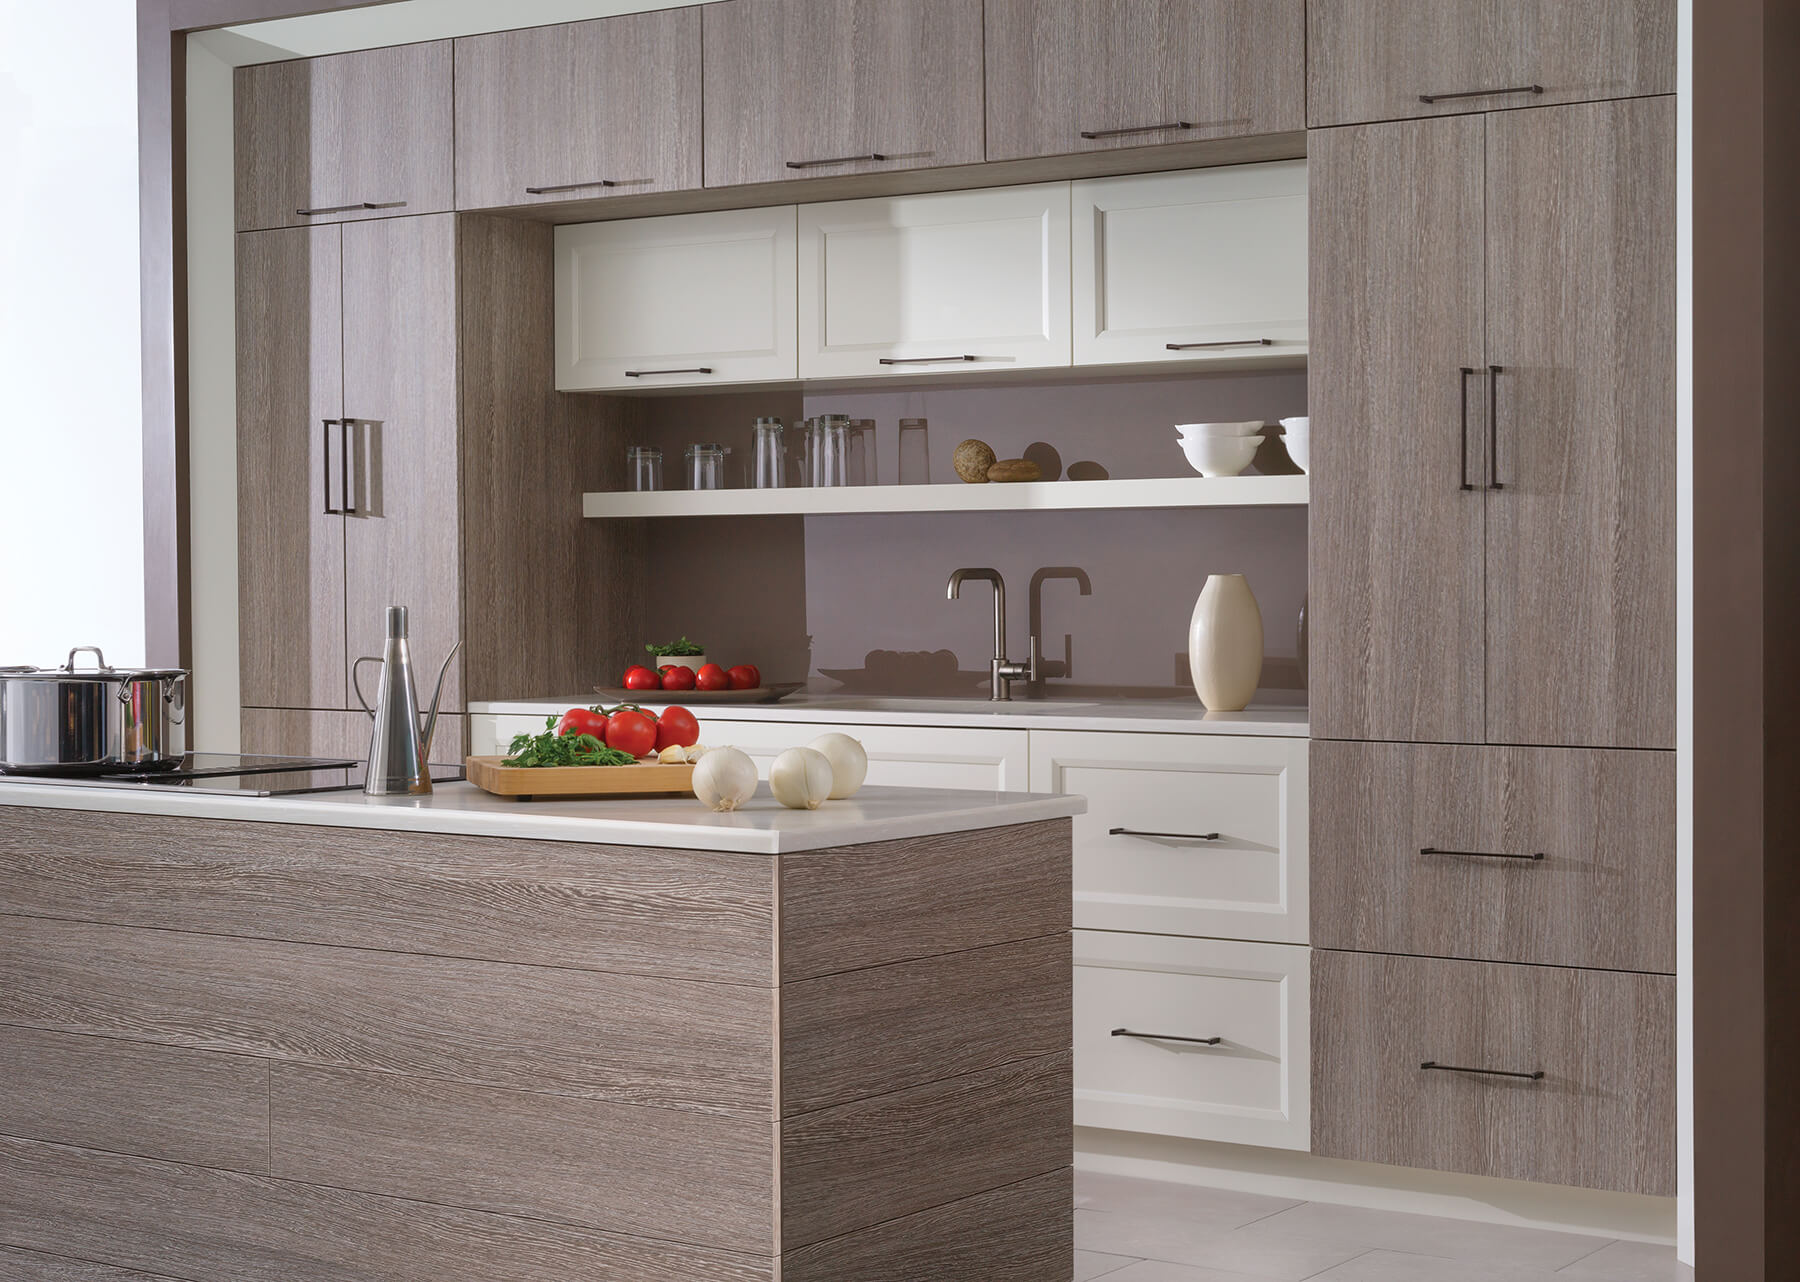 Laminate Kitchen Cabinets and Countertops Have Advantages